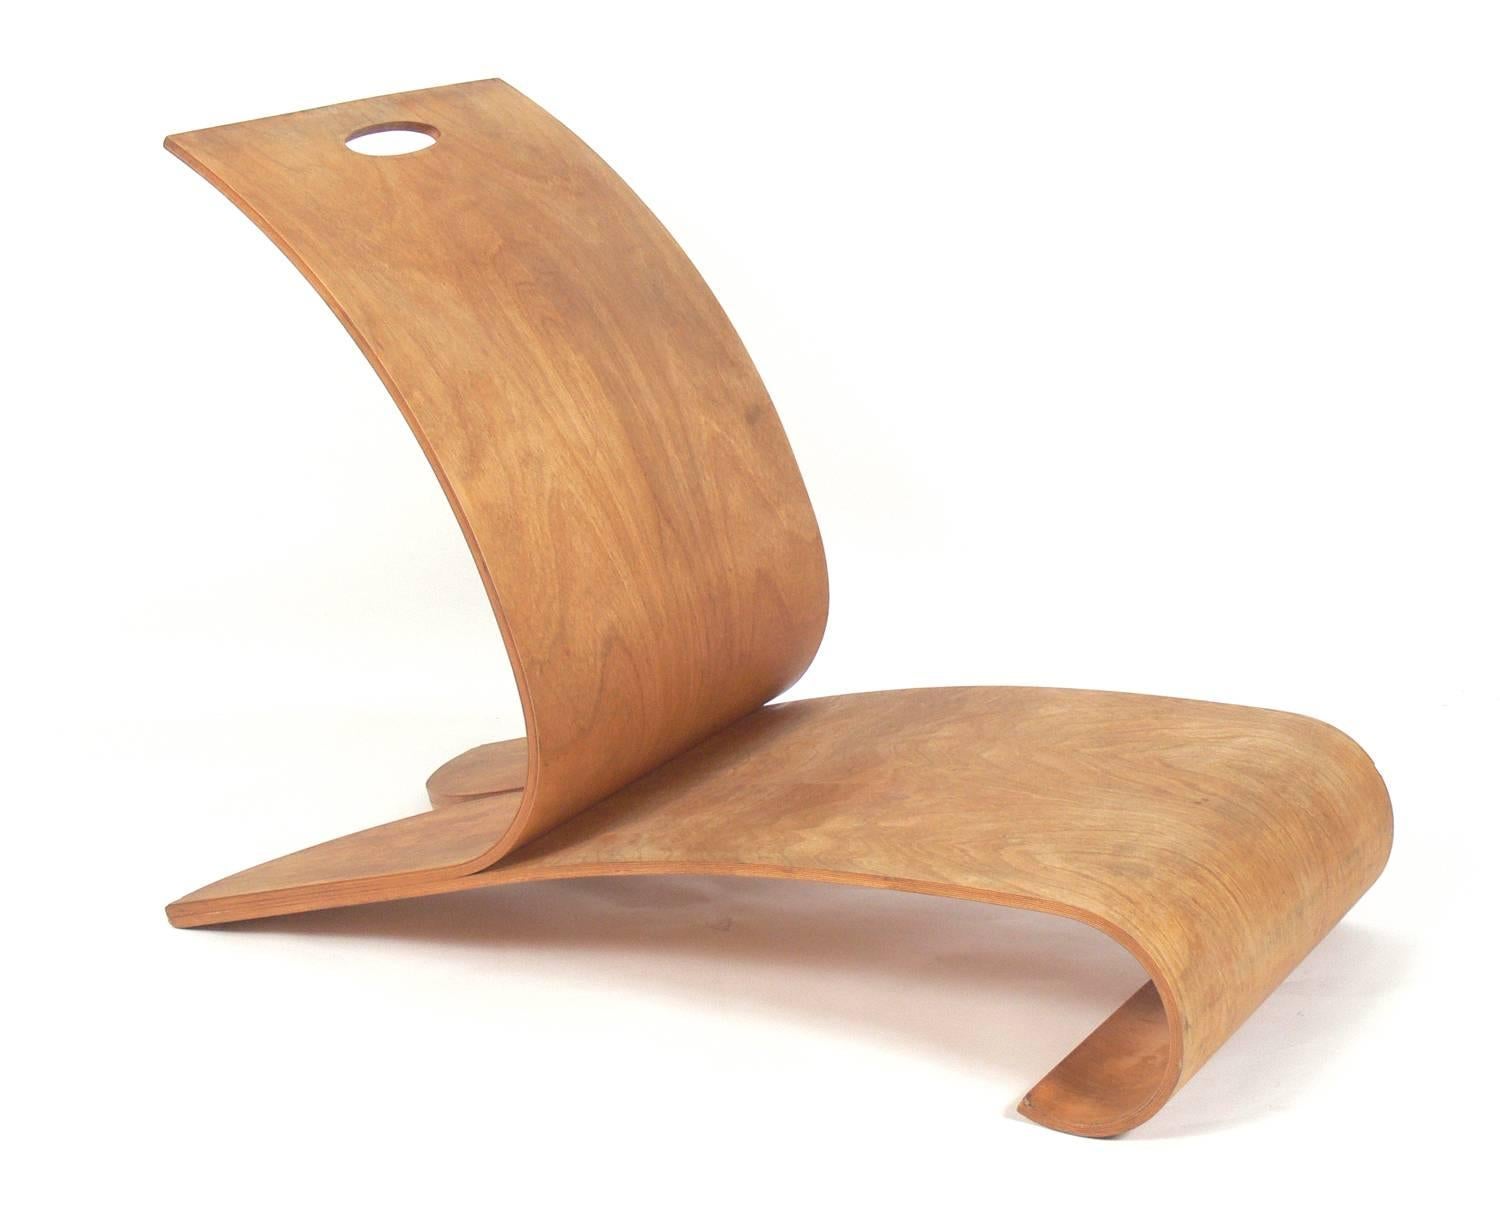 Curvaceous bentwood lounge chair, American, circa 2000s. Cuvaceous low slung form constructed of molded plywood. Artist signed on the bottom.